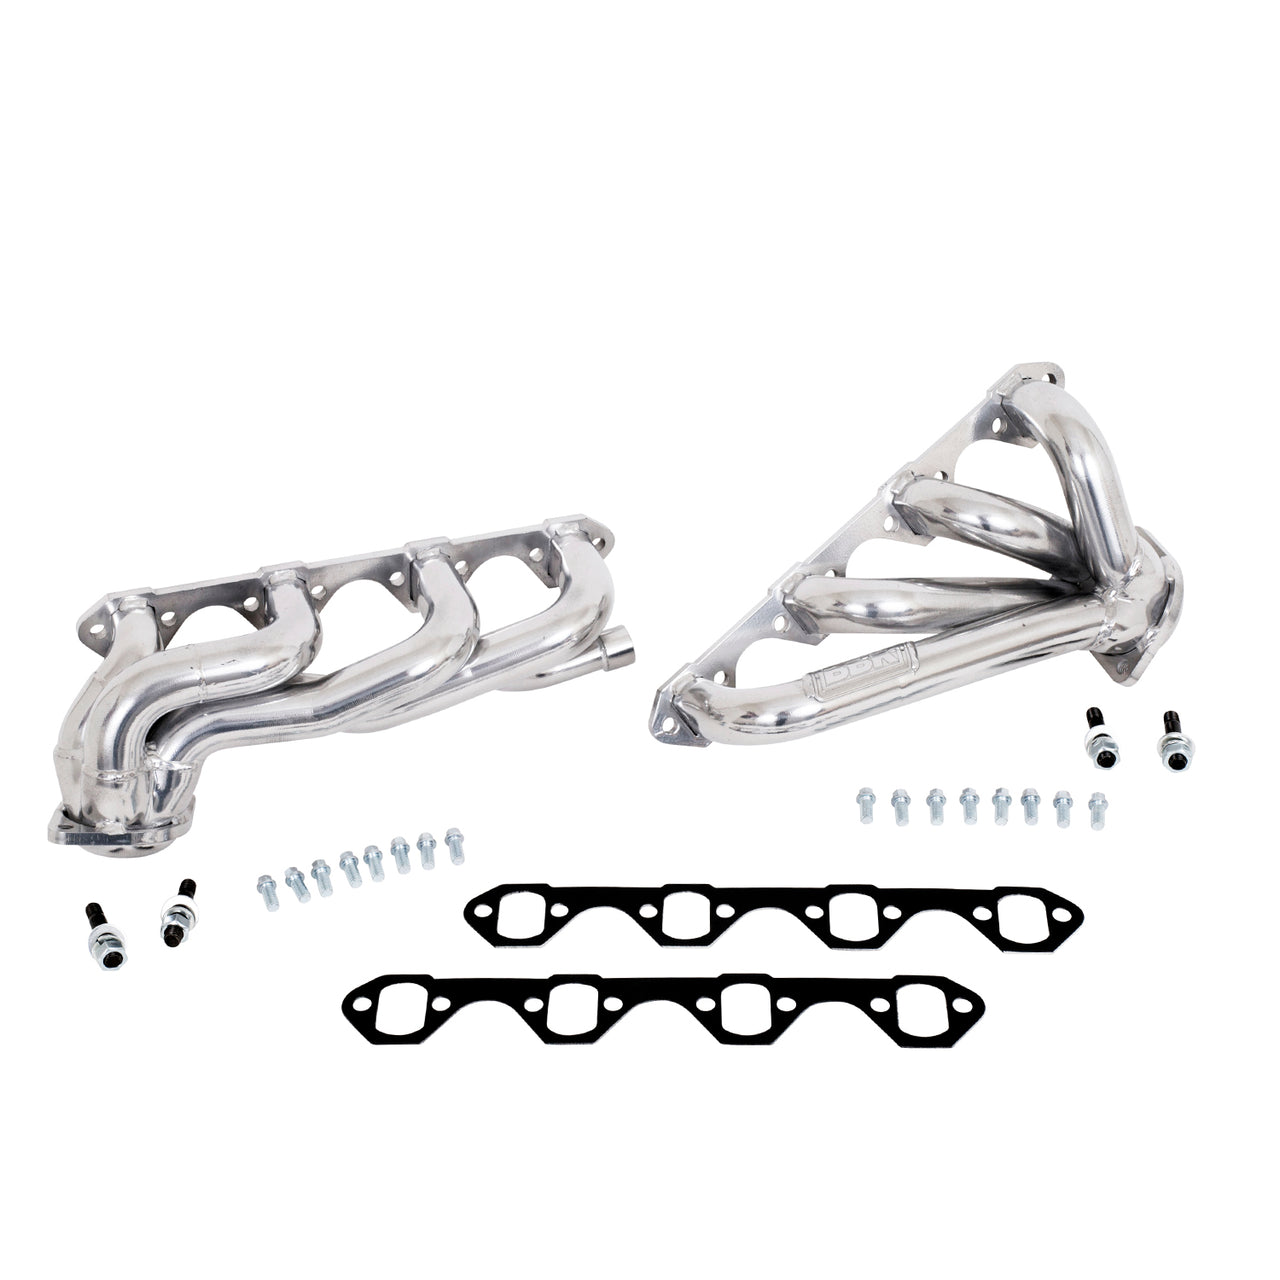 1987-1995 FORD F150 351 1-5/8 SHORTY HEADERS (POLISHED SILVER CERAMIC)